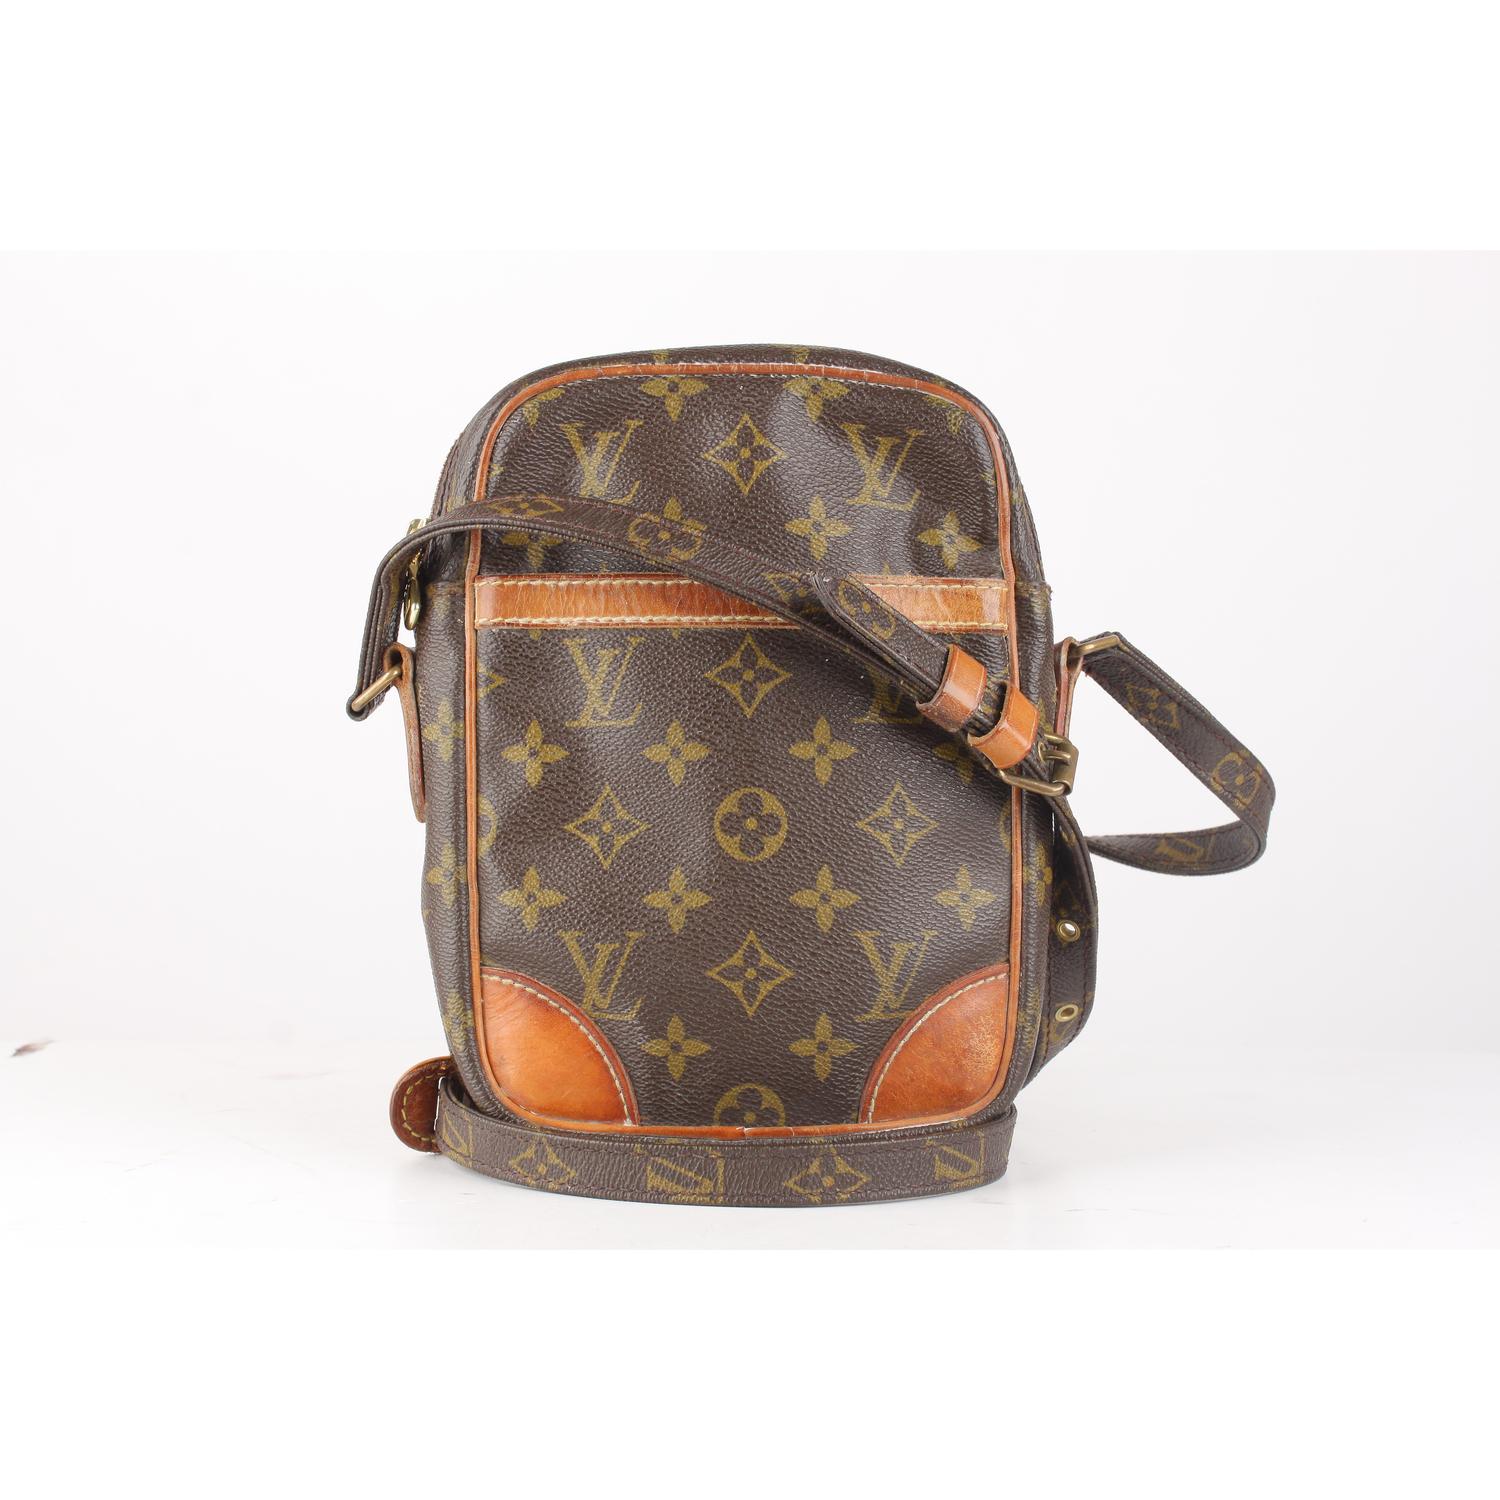 Stylish DANUBE messenger bag by LOUIS VUITTON, crafted in timeless monogram canvas. The bag features tan leather trim, a front open pocket and gold metal hardware.Adjustable leather shoulder strap with shoulder pad (53 inches - 134,7cm) The top